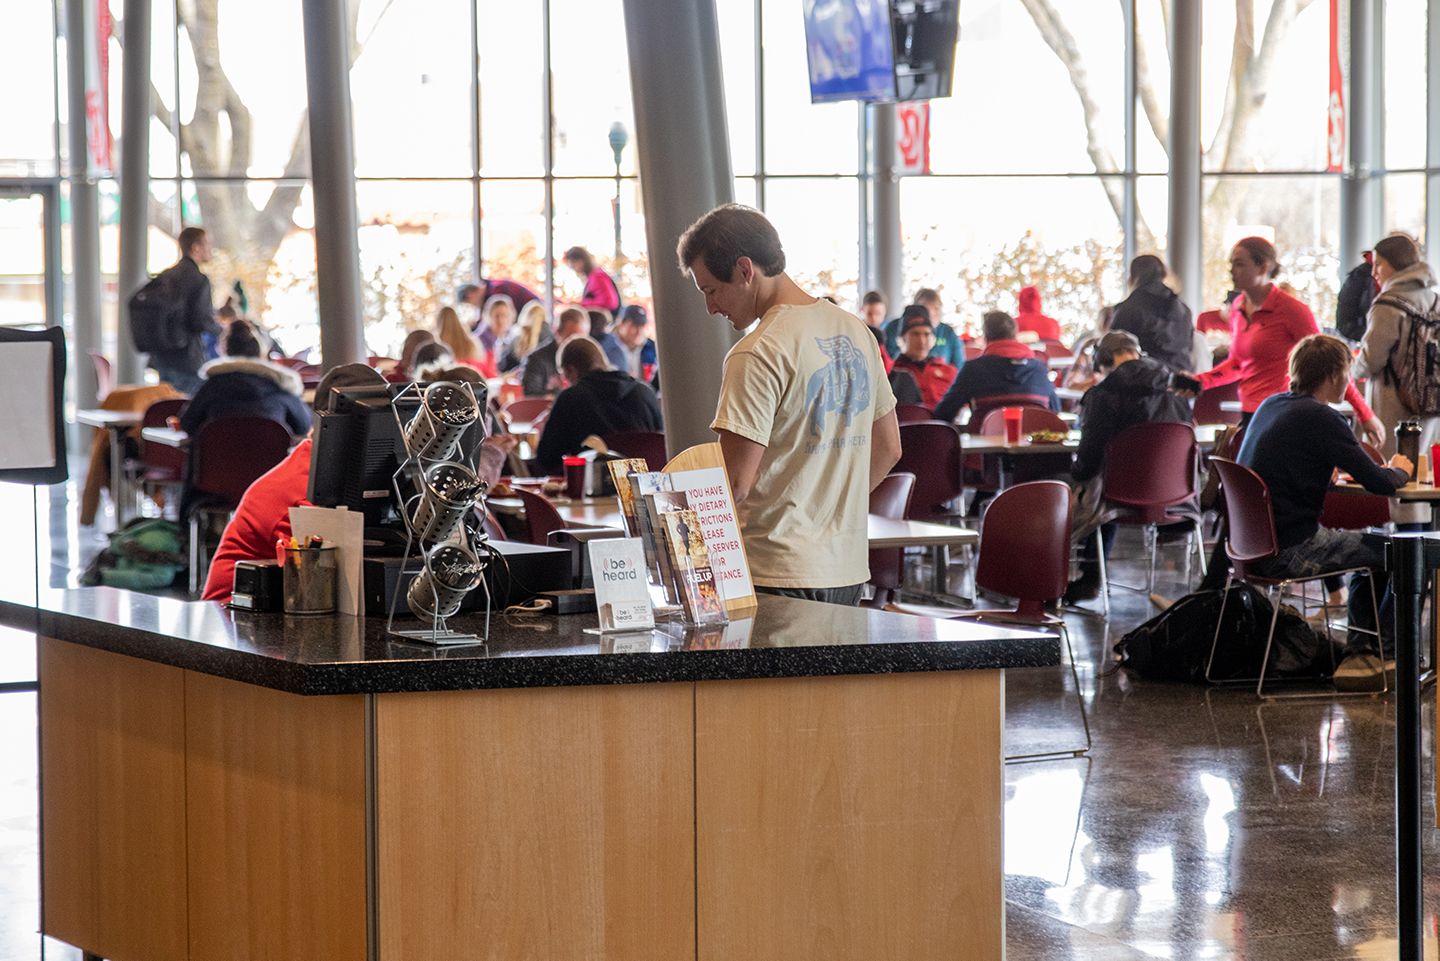 MUC Dining guest swipe policy updated after USD discovers influx of free meals